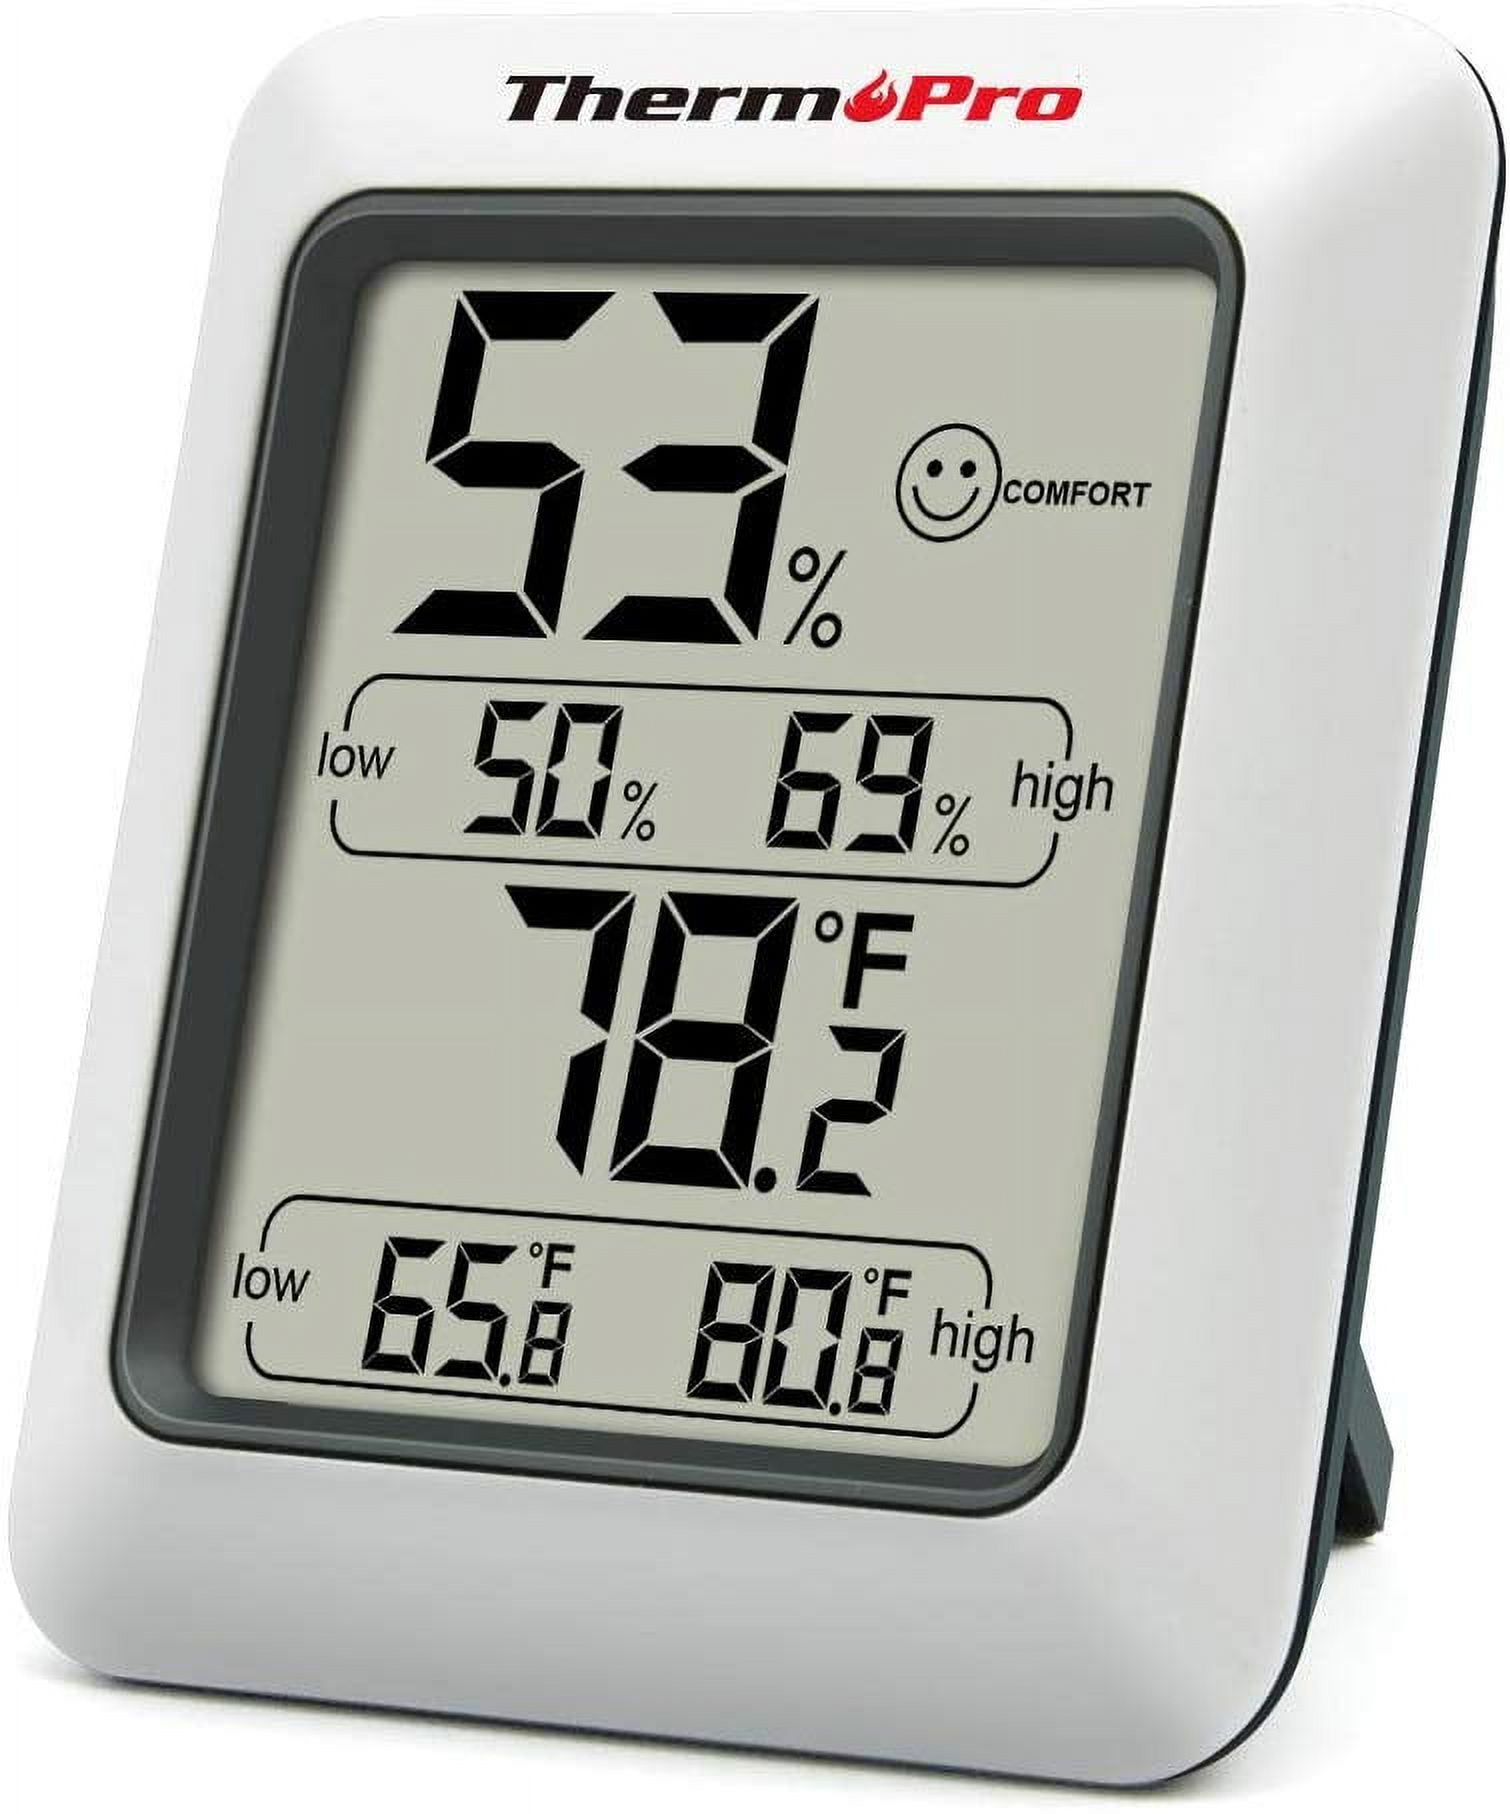 ThermoPro Tp50 Digital Hygrometer Indoor Thermometer Humidity Monitor with Temperature Humidity Gauge